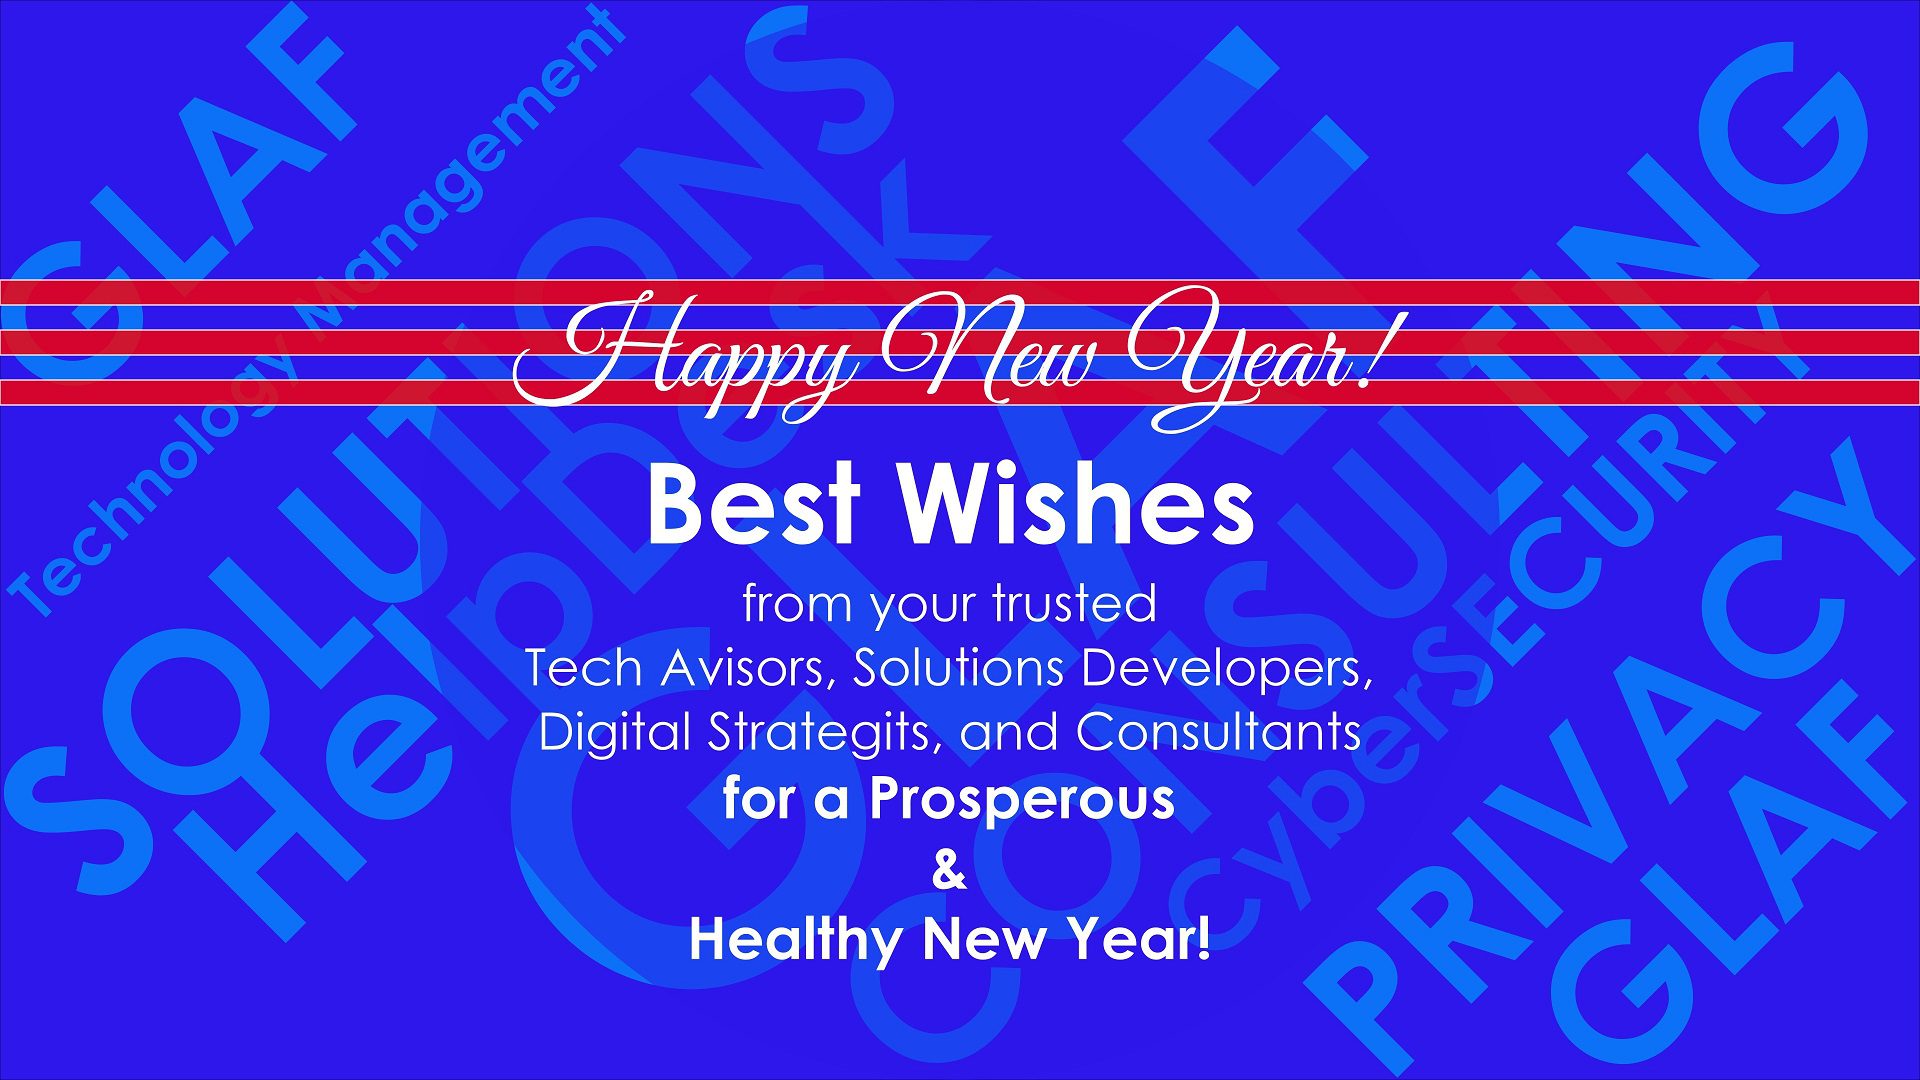 Happy New Year!

Best Wishes - from your trusted Tech Advisors, Solutions Developers, Digital Strategists, PodcastS Producers, and Technology Consultants - for a Healthy and Prosperous New Year!